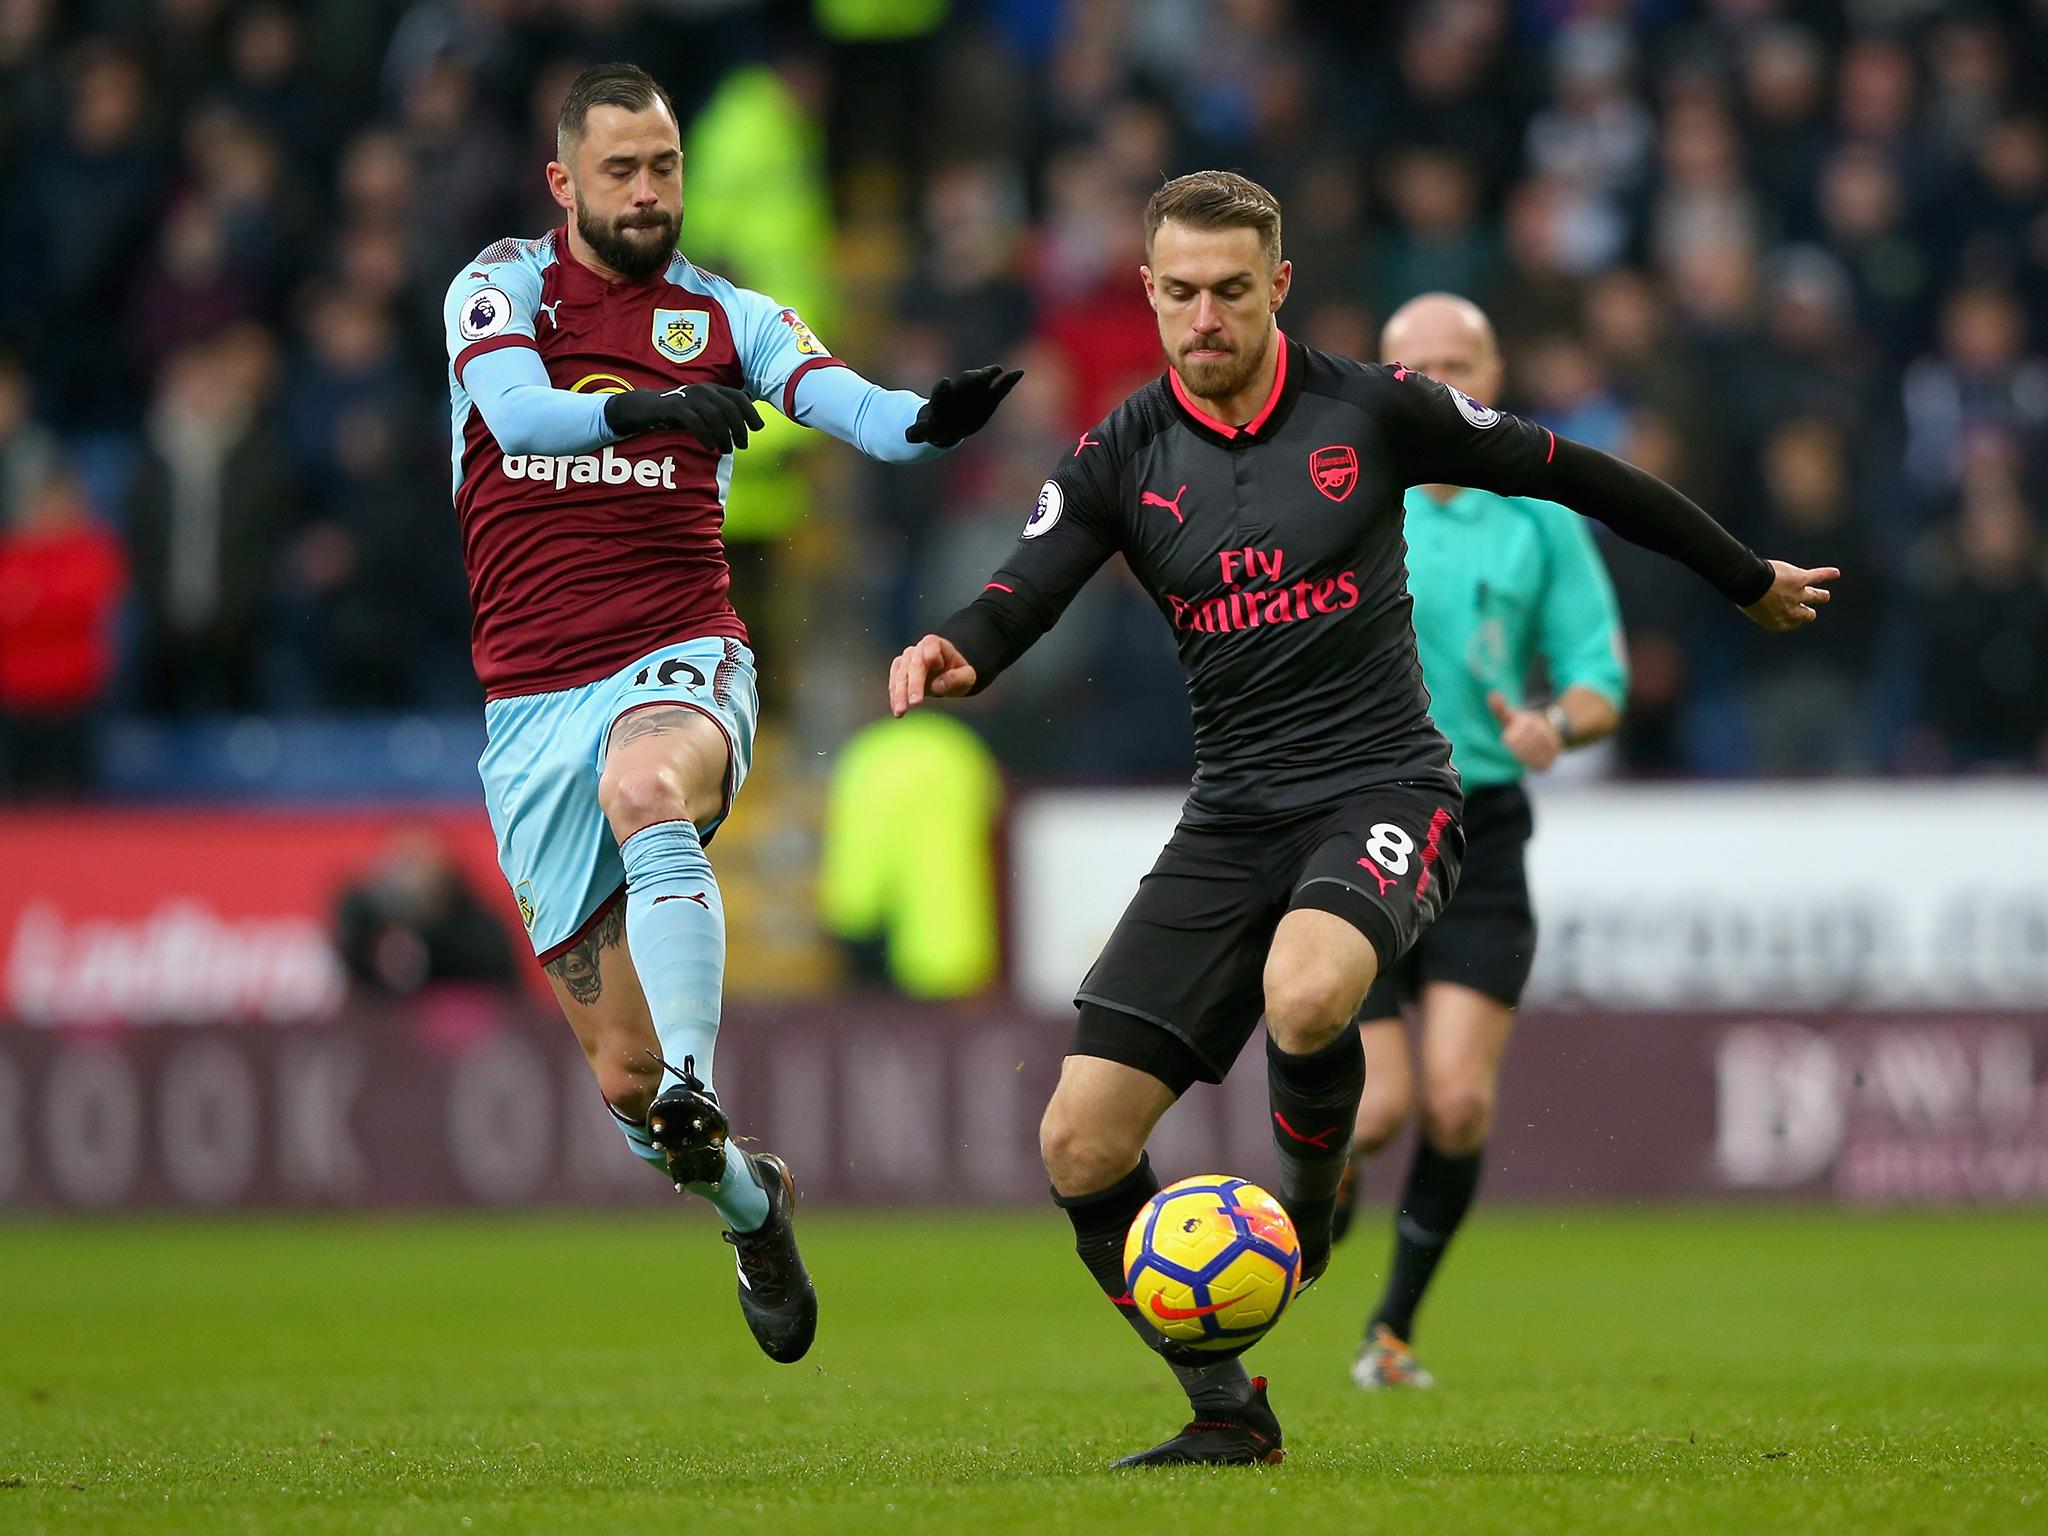 Aaron Ramsey takes on Steven Defour during Arsenal's clash with Burnley